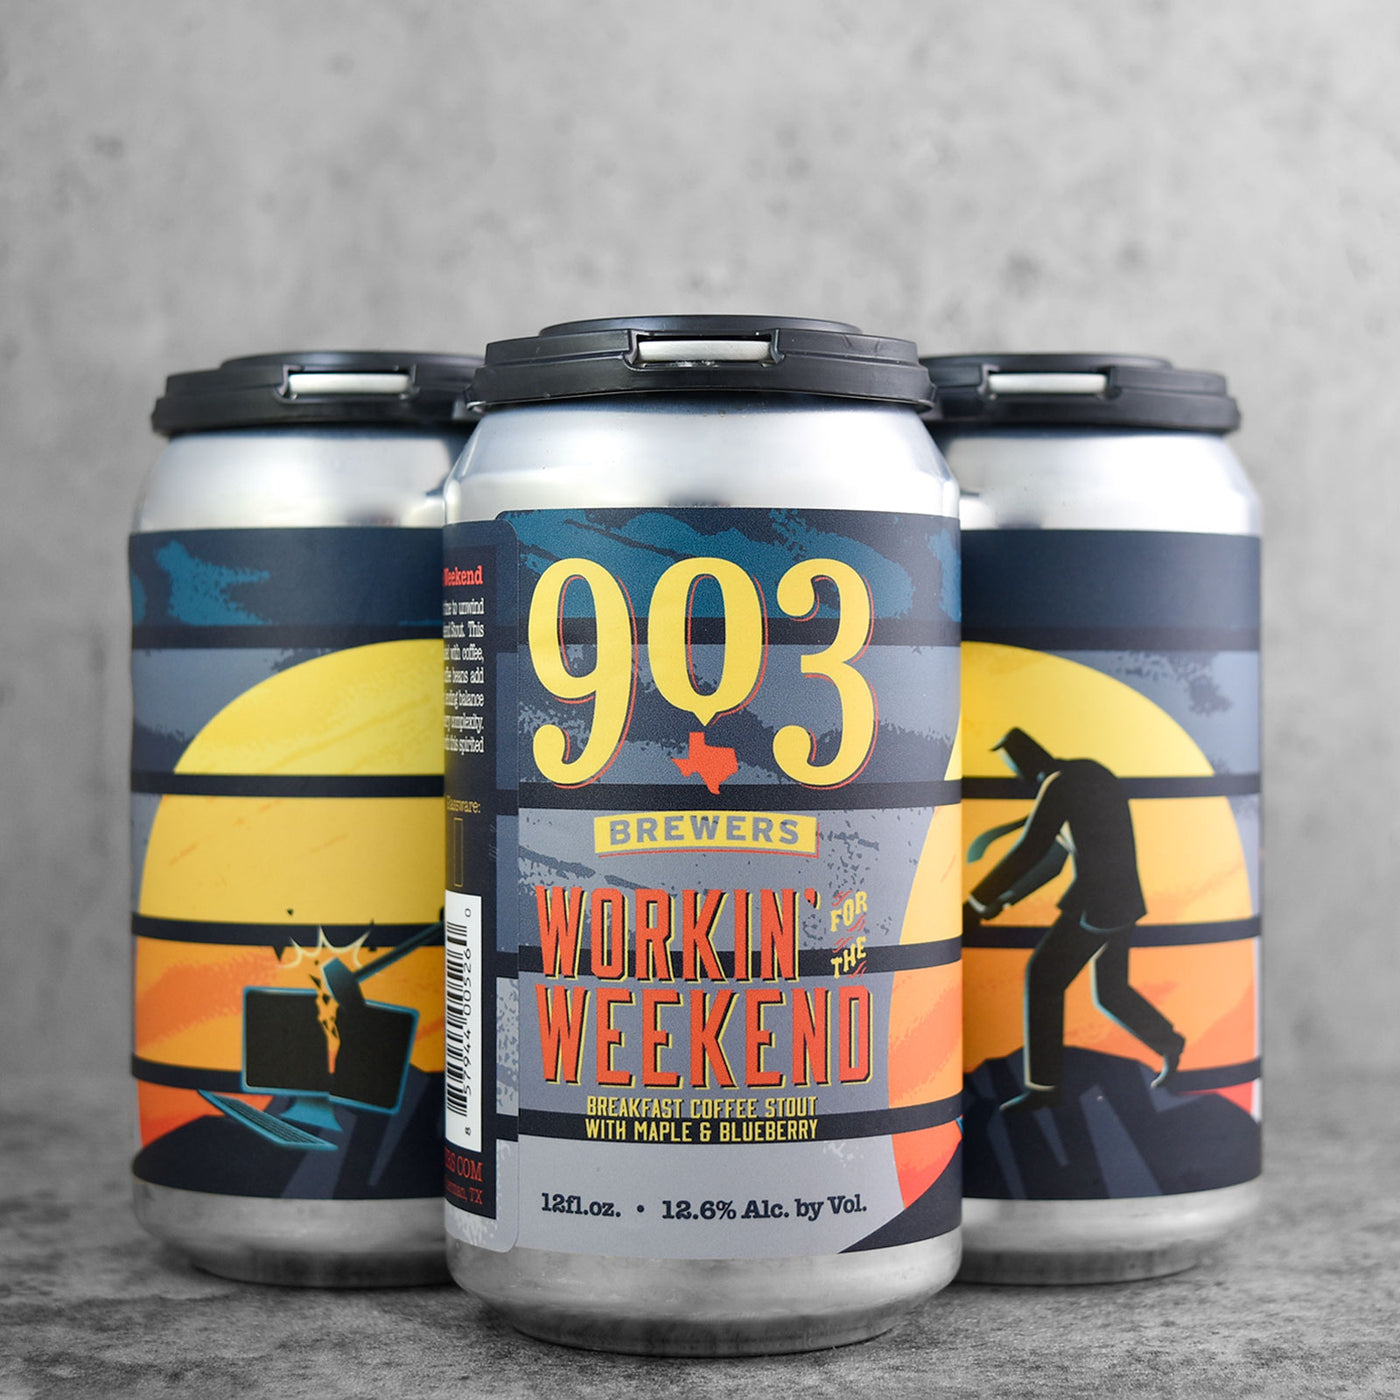 903 Brewers Workin' for the Weekend